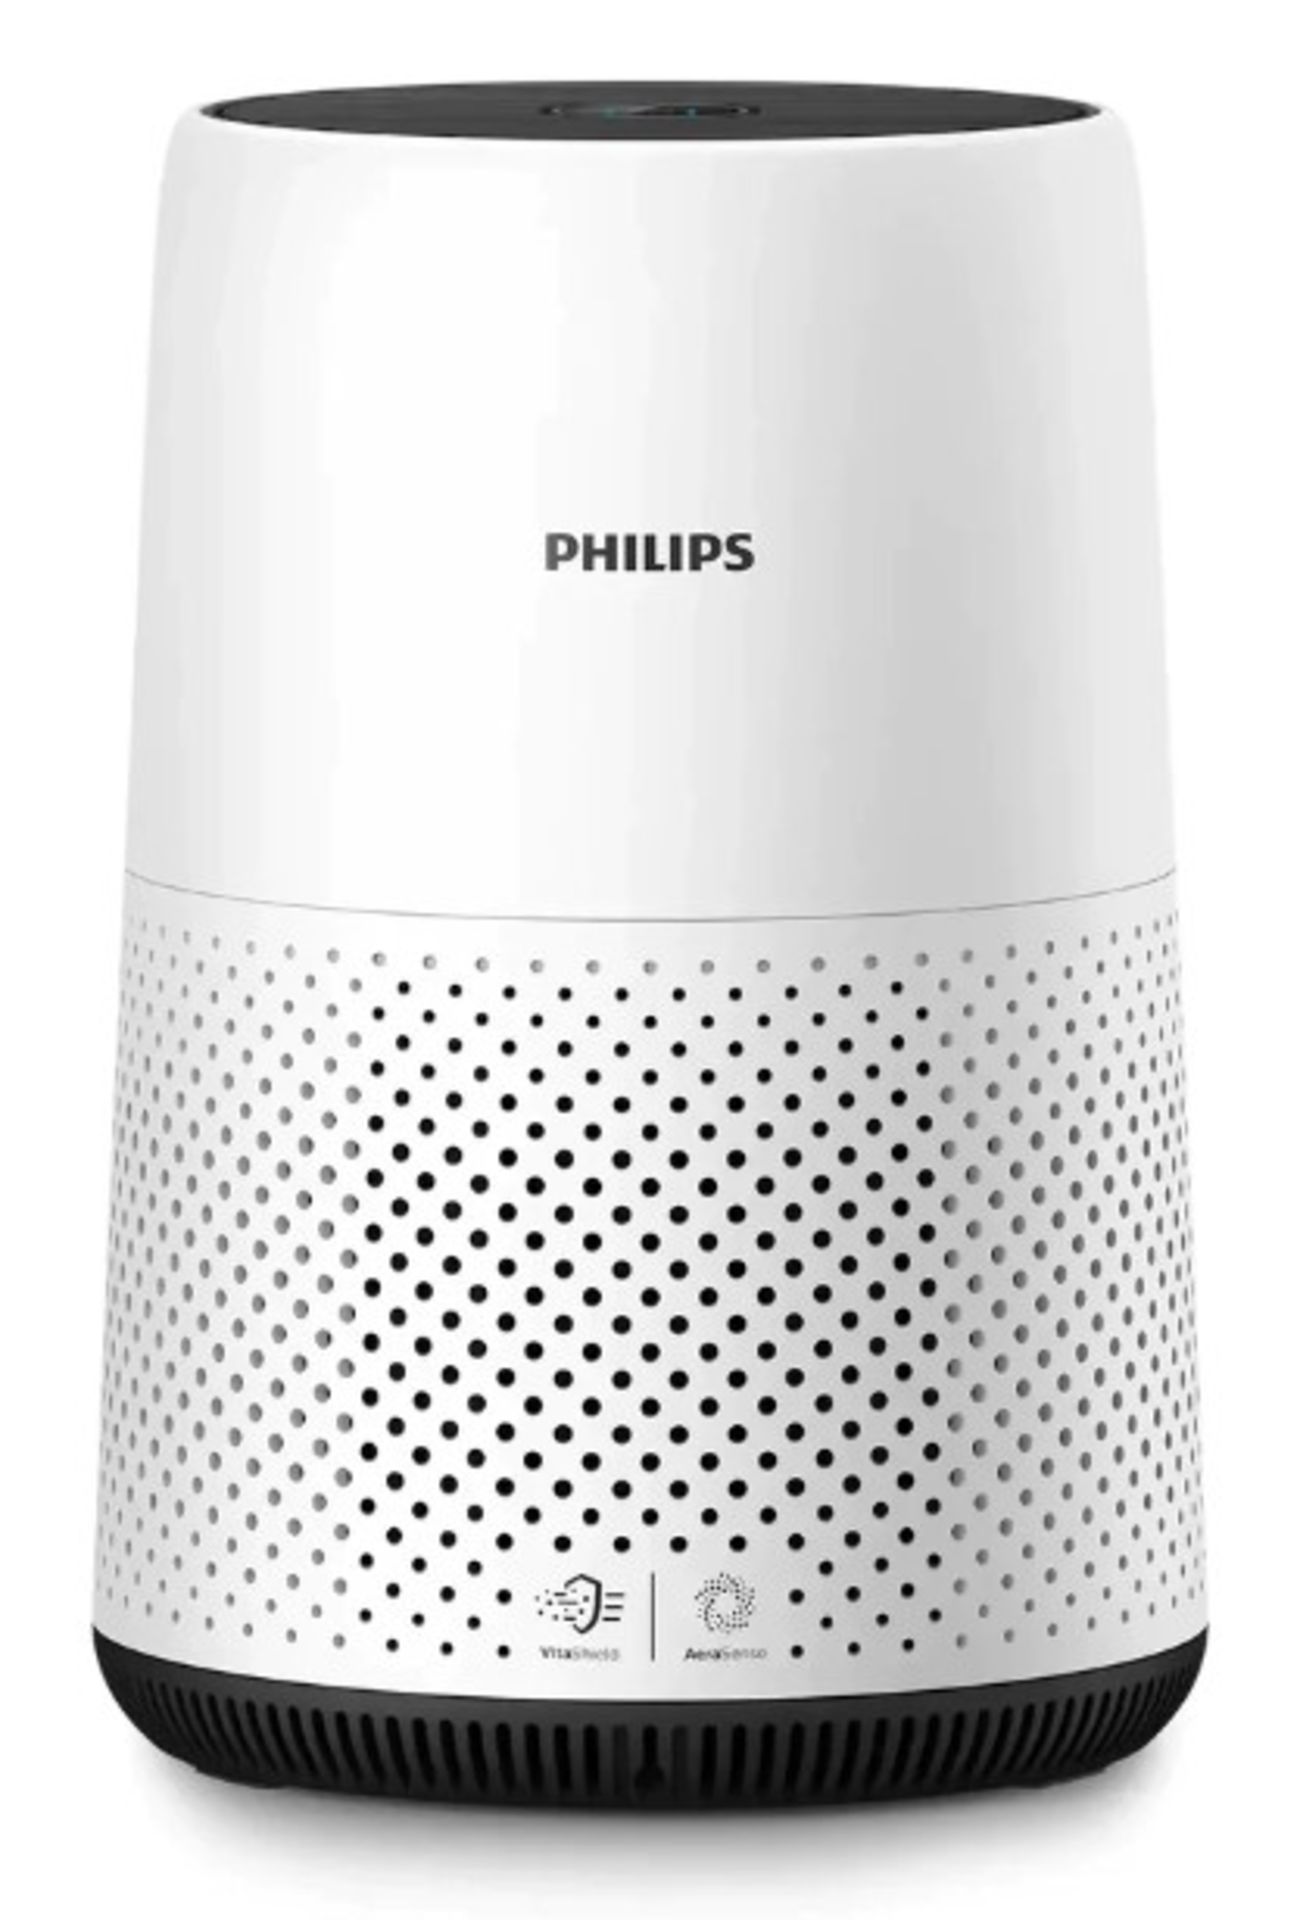 PHILIPS AC0820/30 AIR PURIFIER. Philips’ new air purifier Series 800 - a small yet effective device,